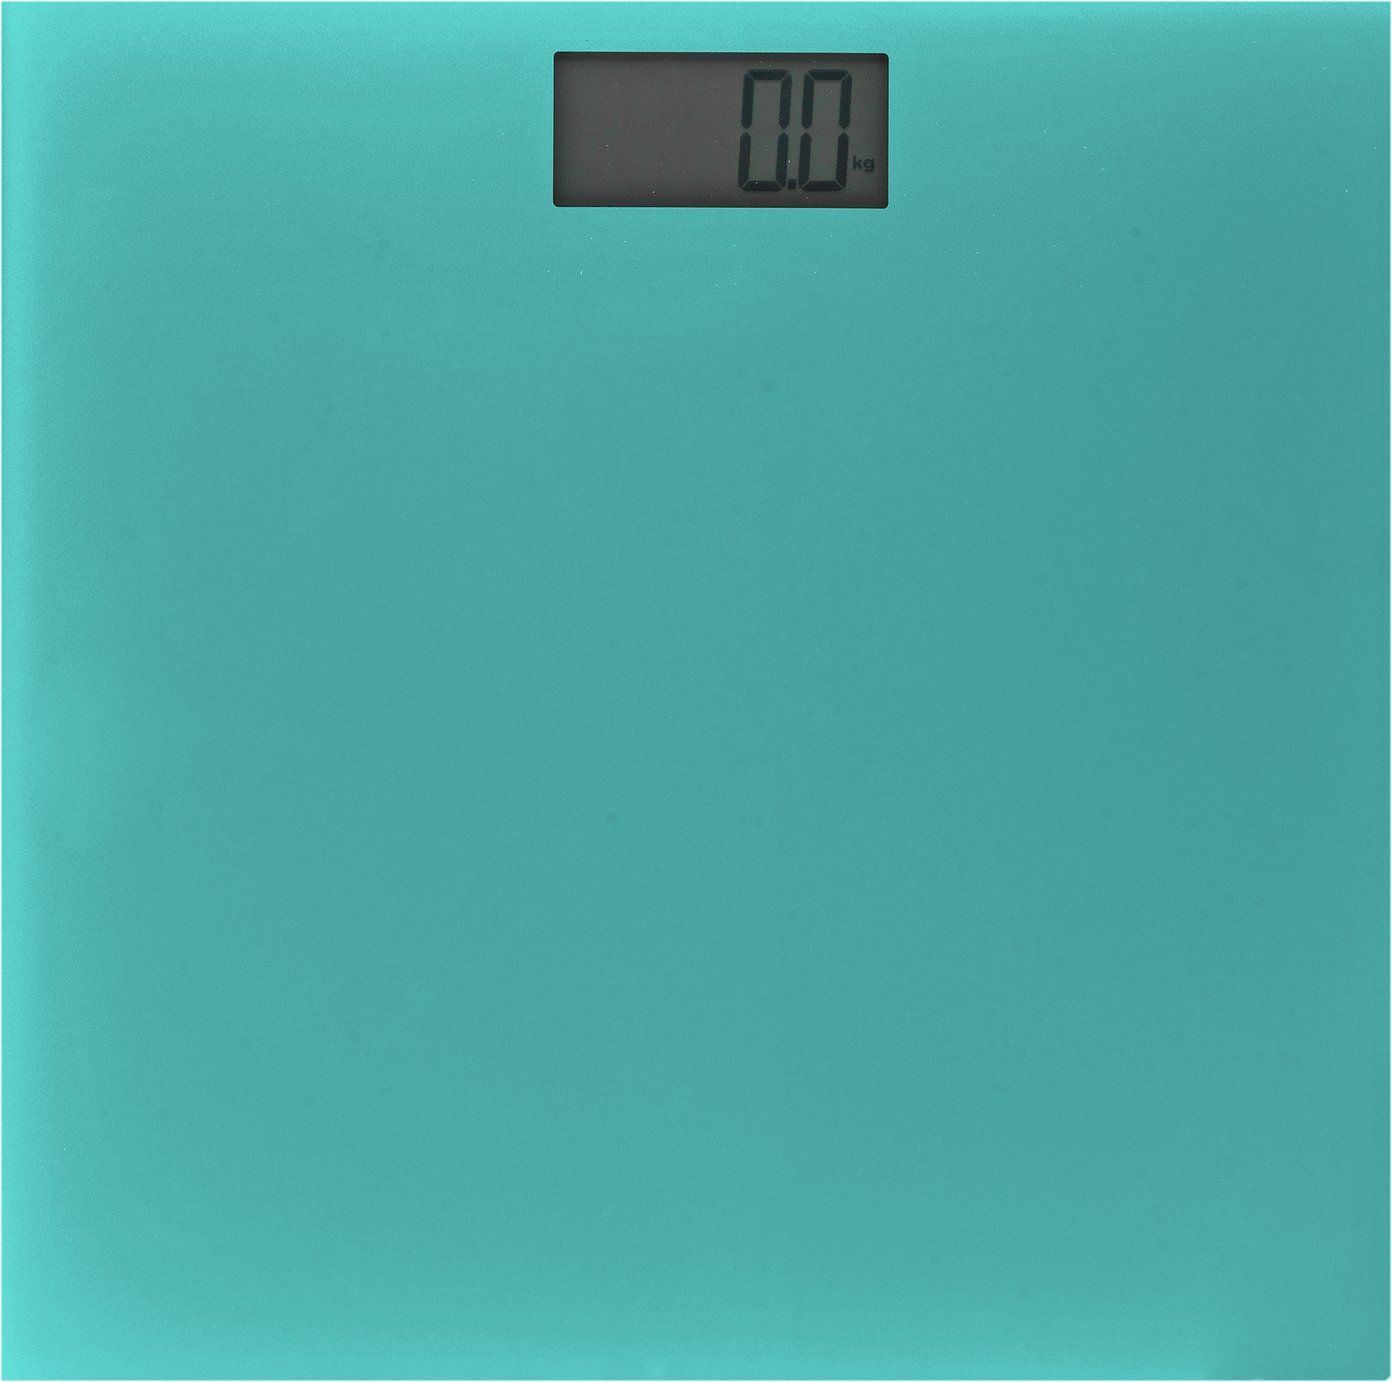 ColourMatch Electronic Scales - Teal